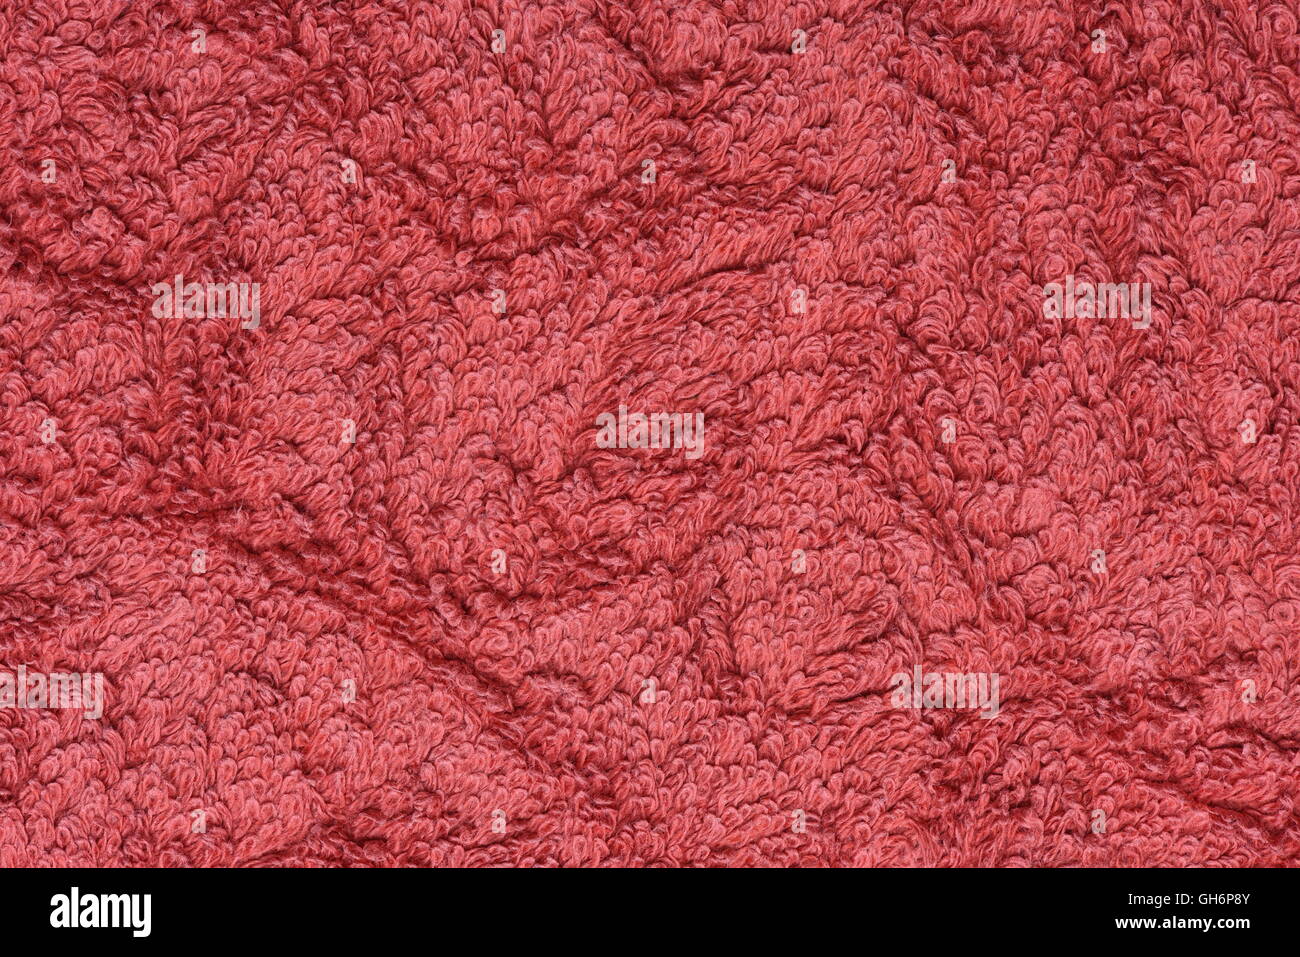 Red towel closeup as background Stock Photo